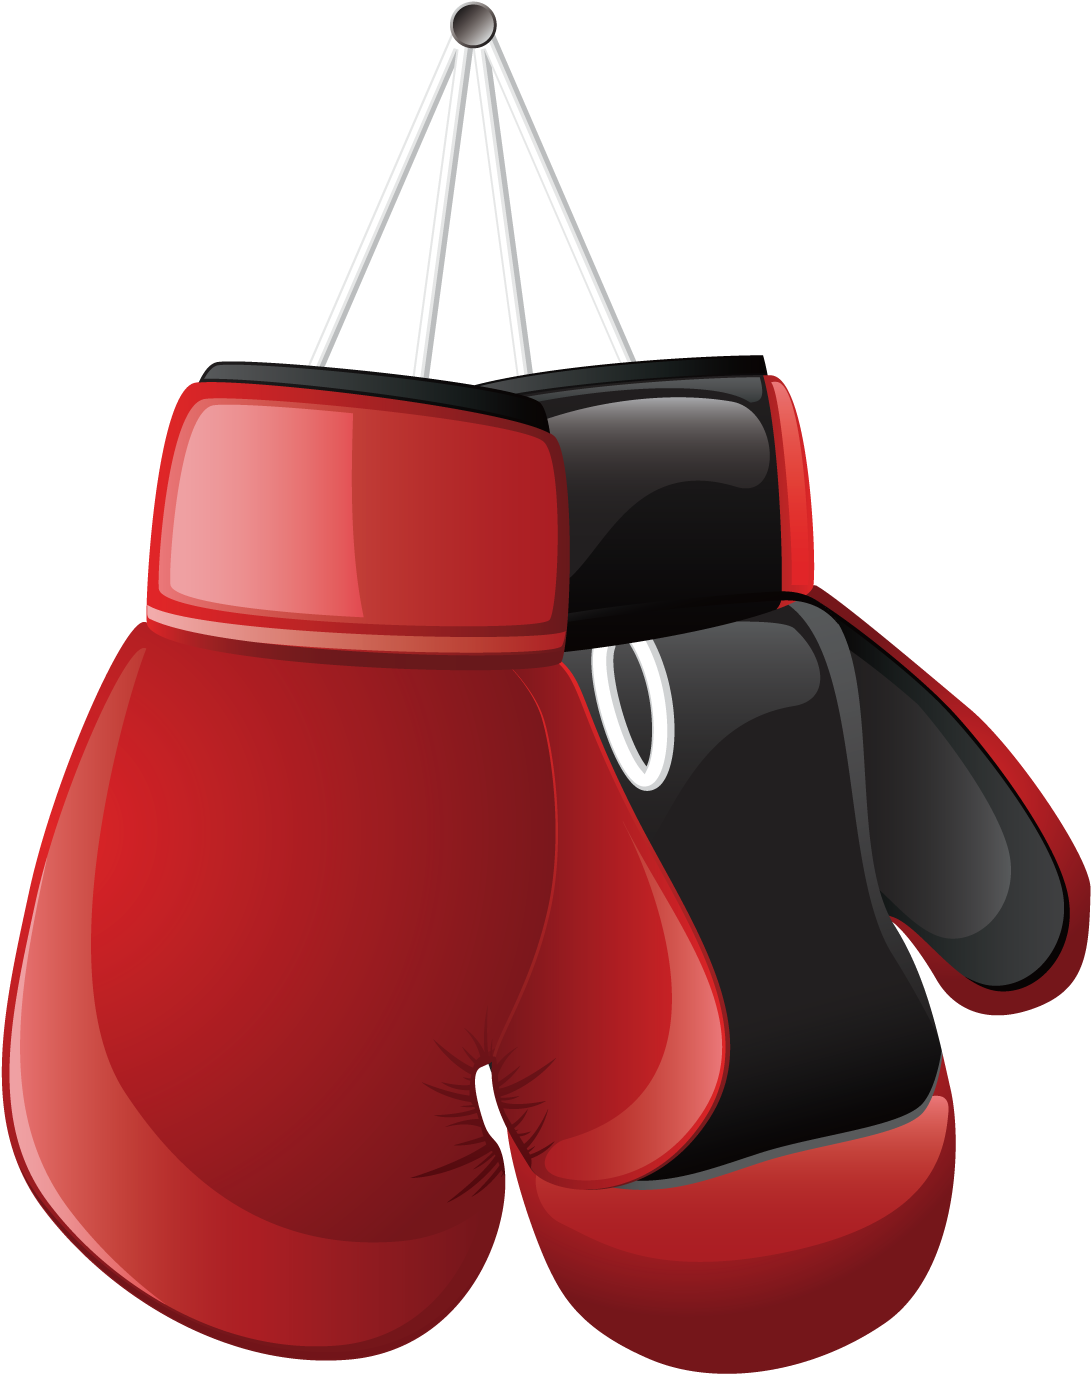 Boxing Glove Clip Art - Boxing Gloves No Background (1500x1500)